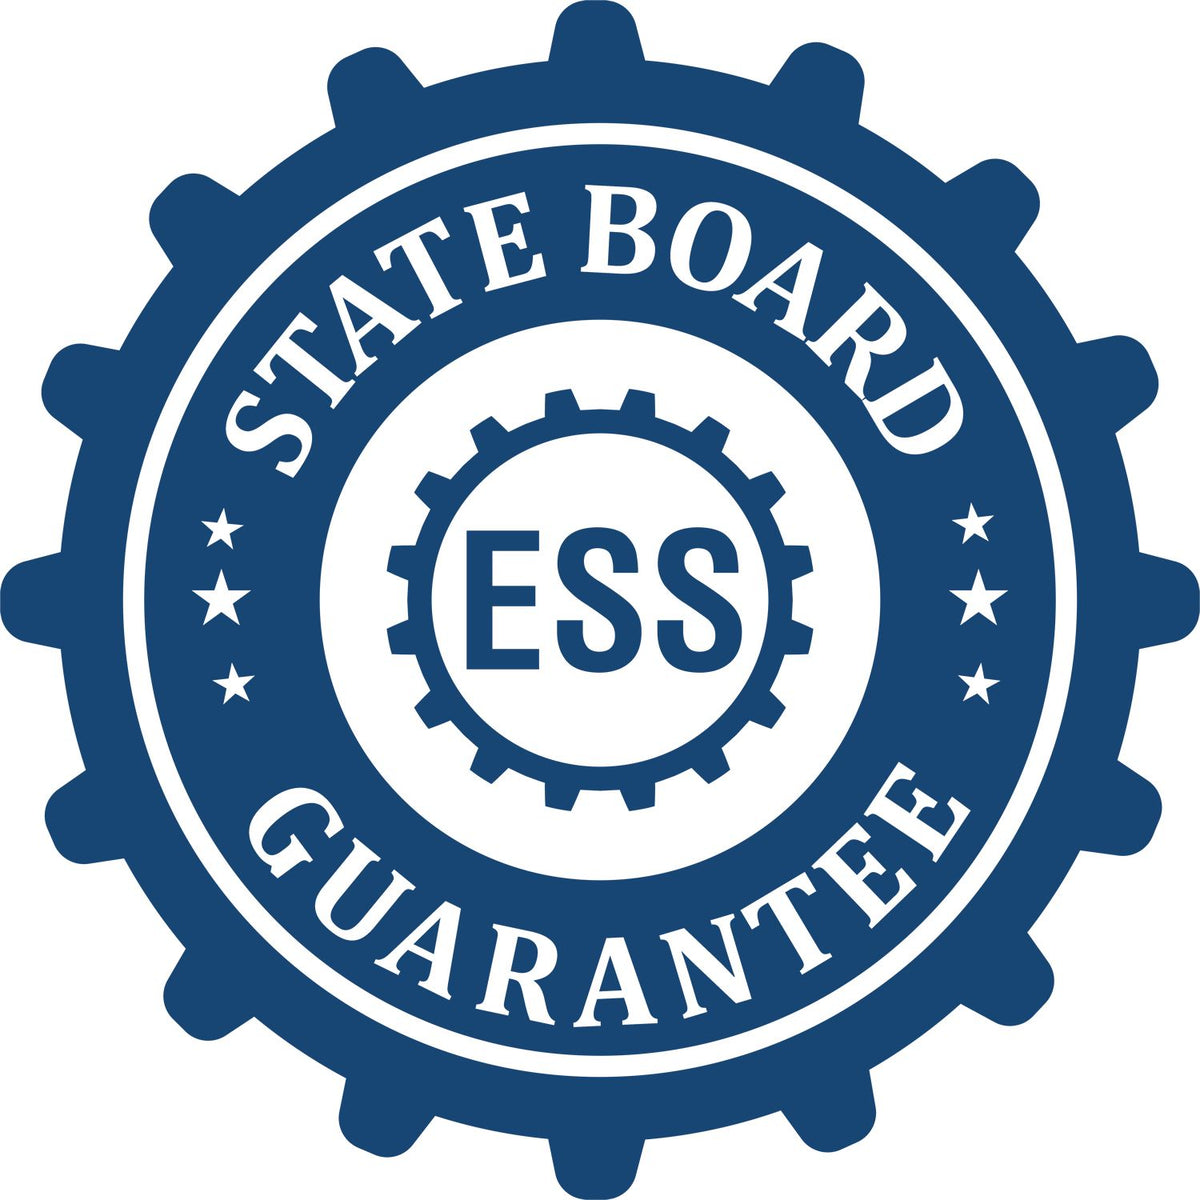 An emblem in a gear shape illustrating a state board guarantee for the Handheld Montana Professional Engineer Embosser product.